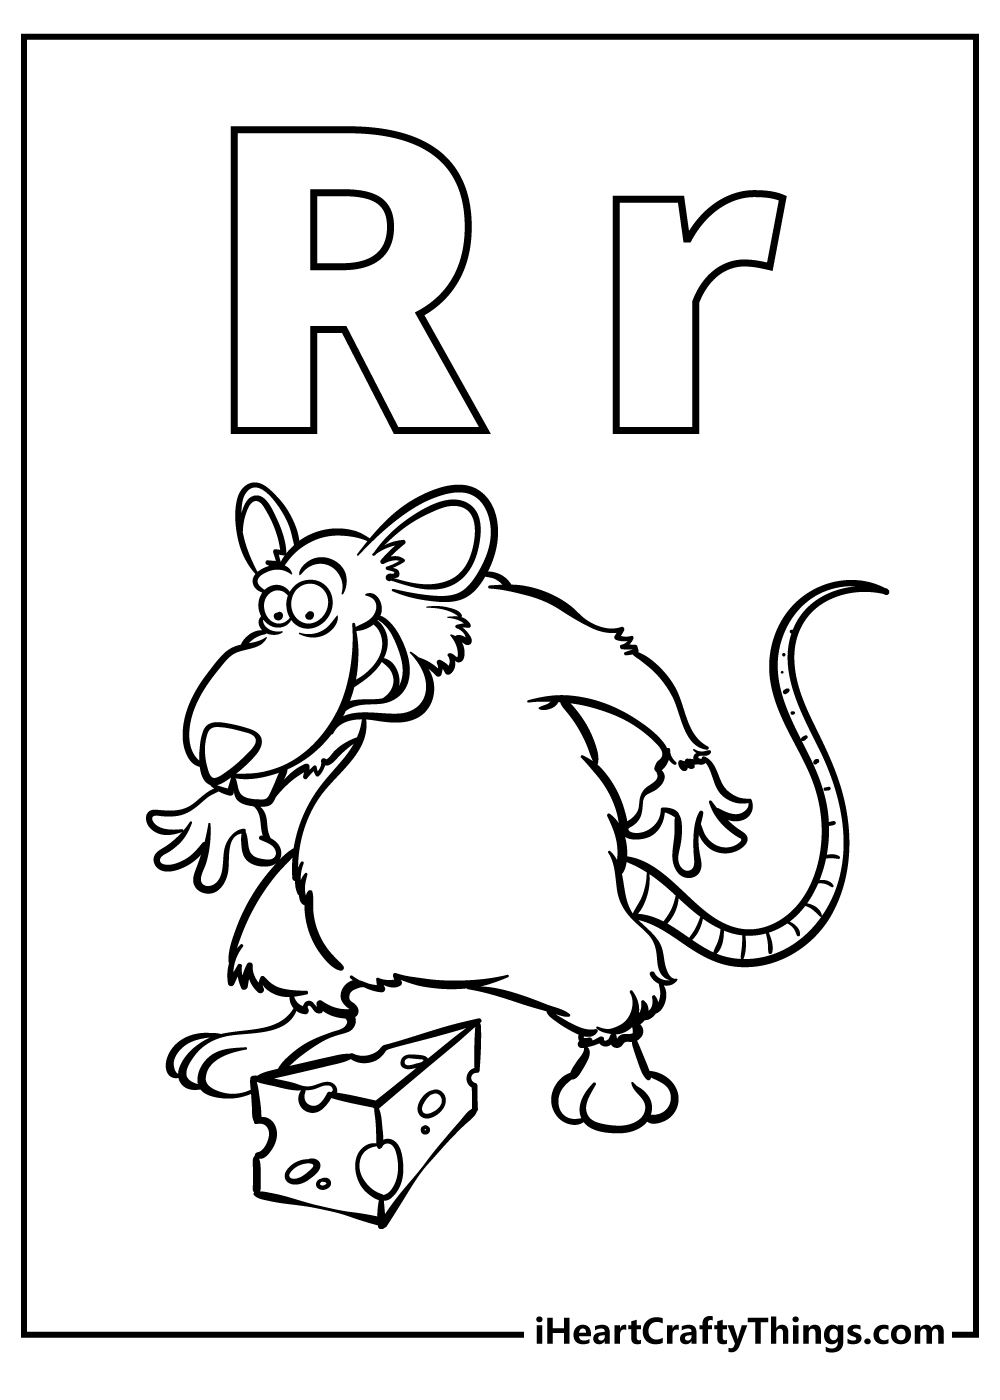 Letter R Easy Coloring Pages